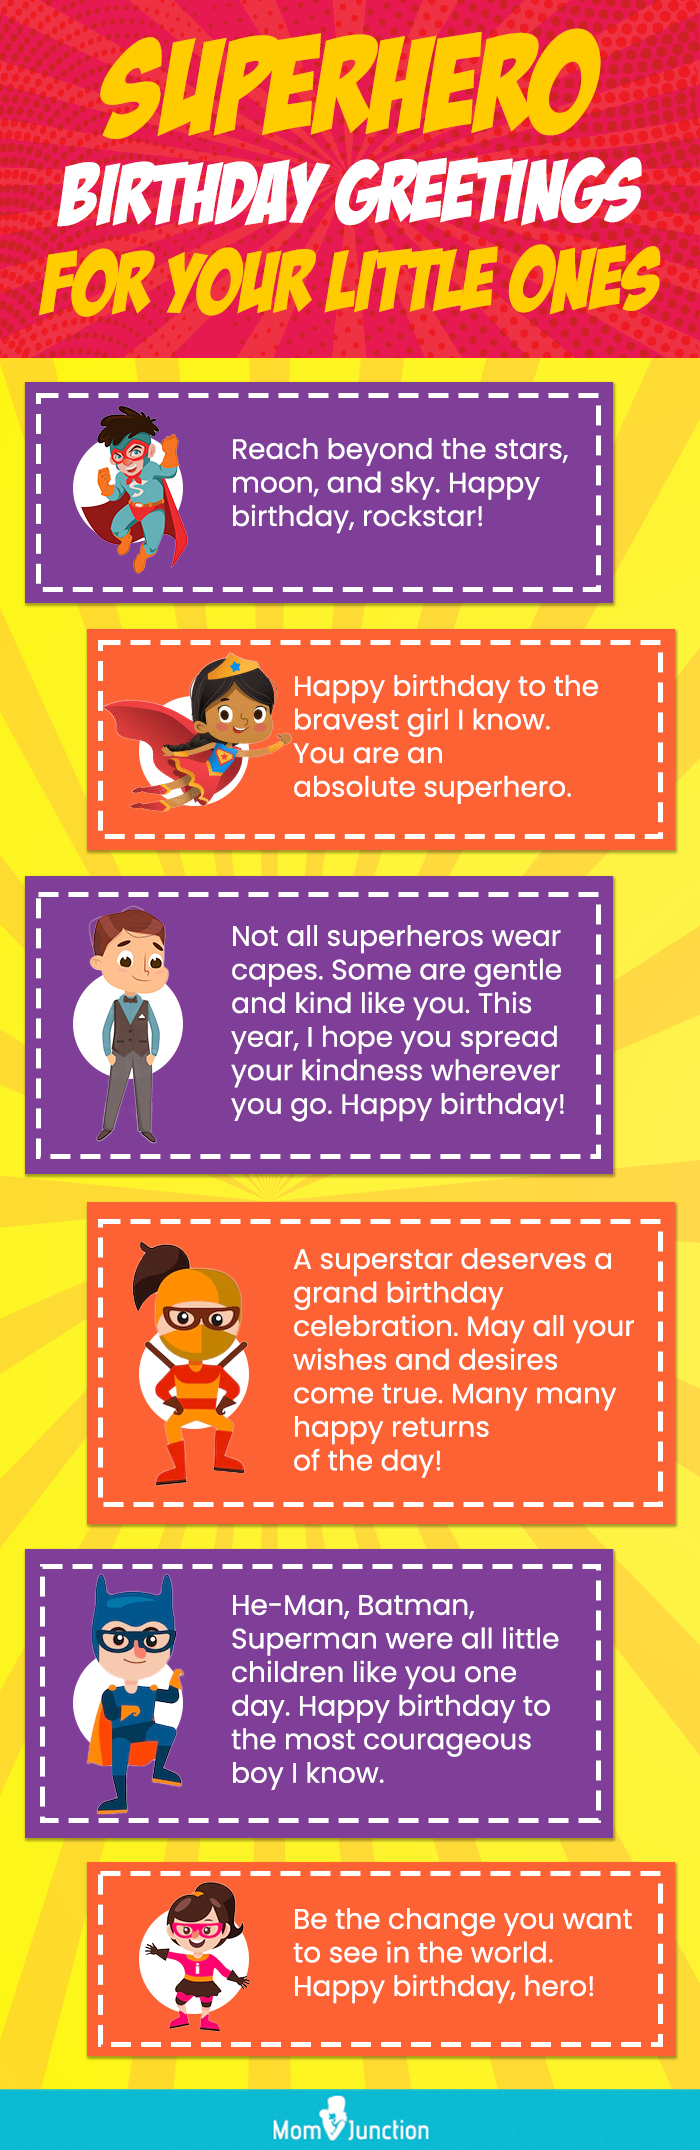 superhero birthday greetings for your little ones [infographic]